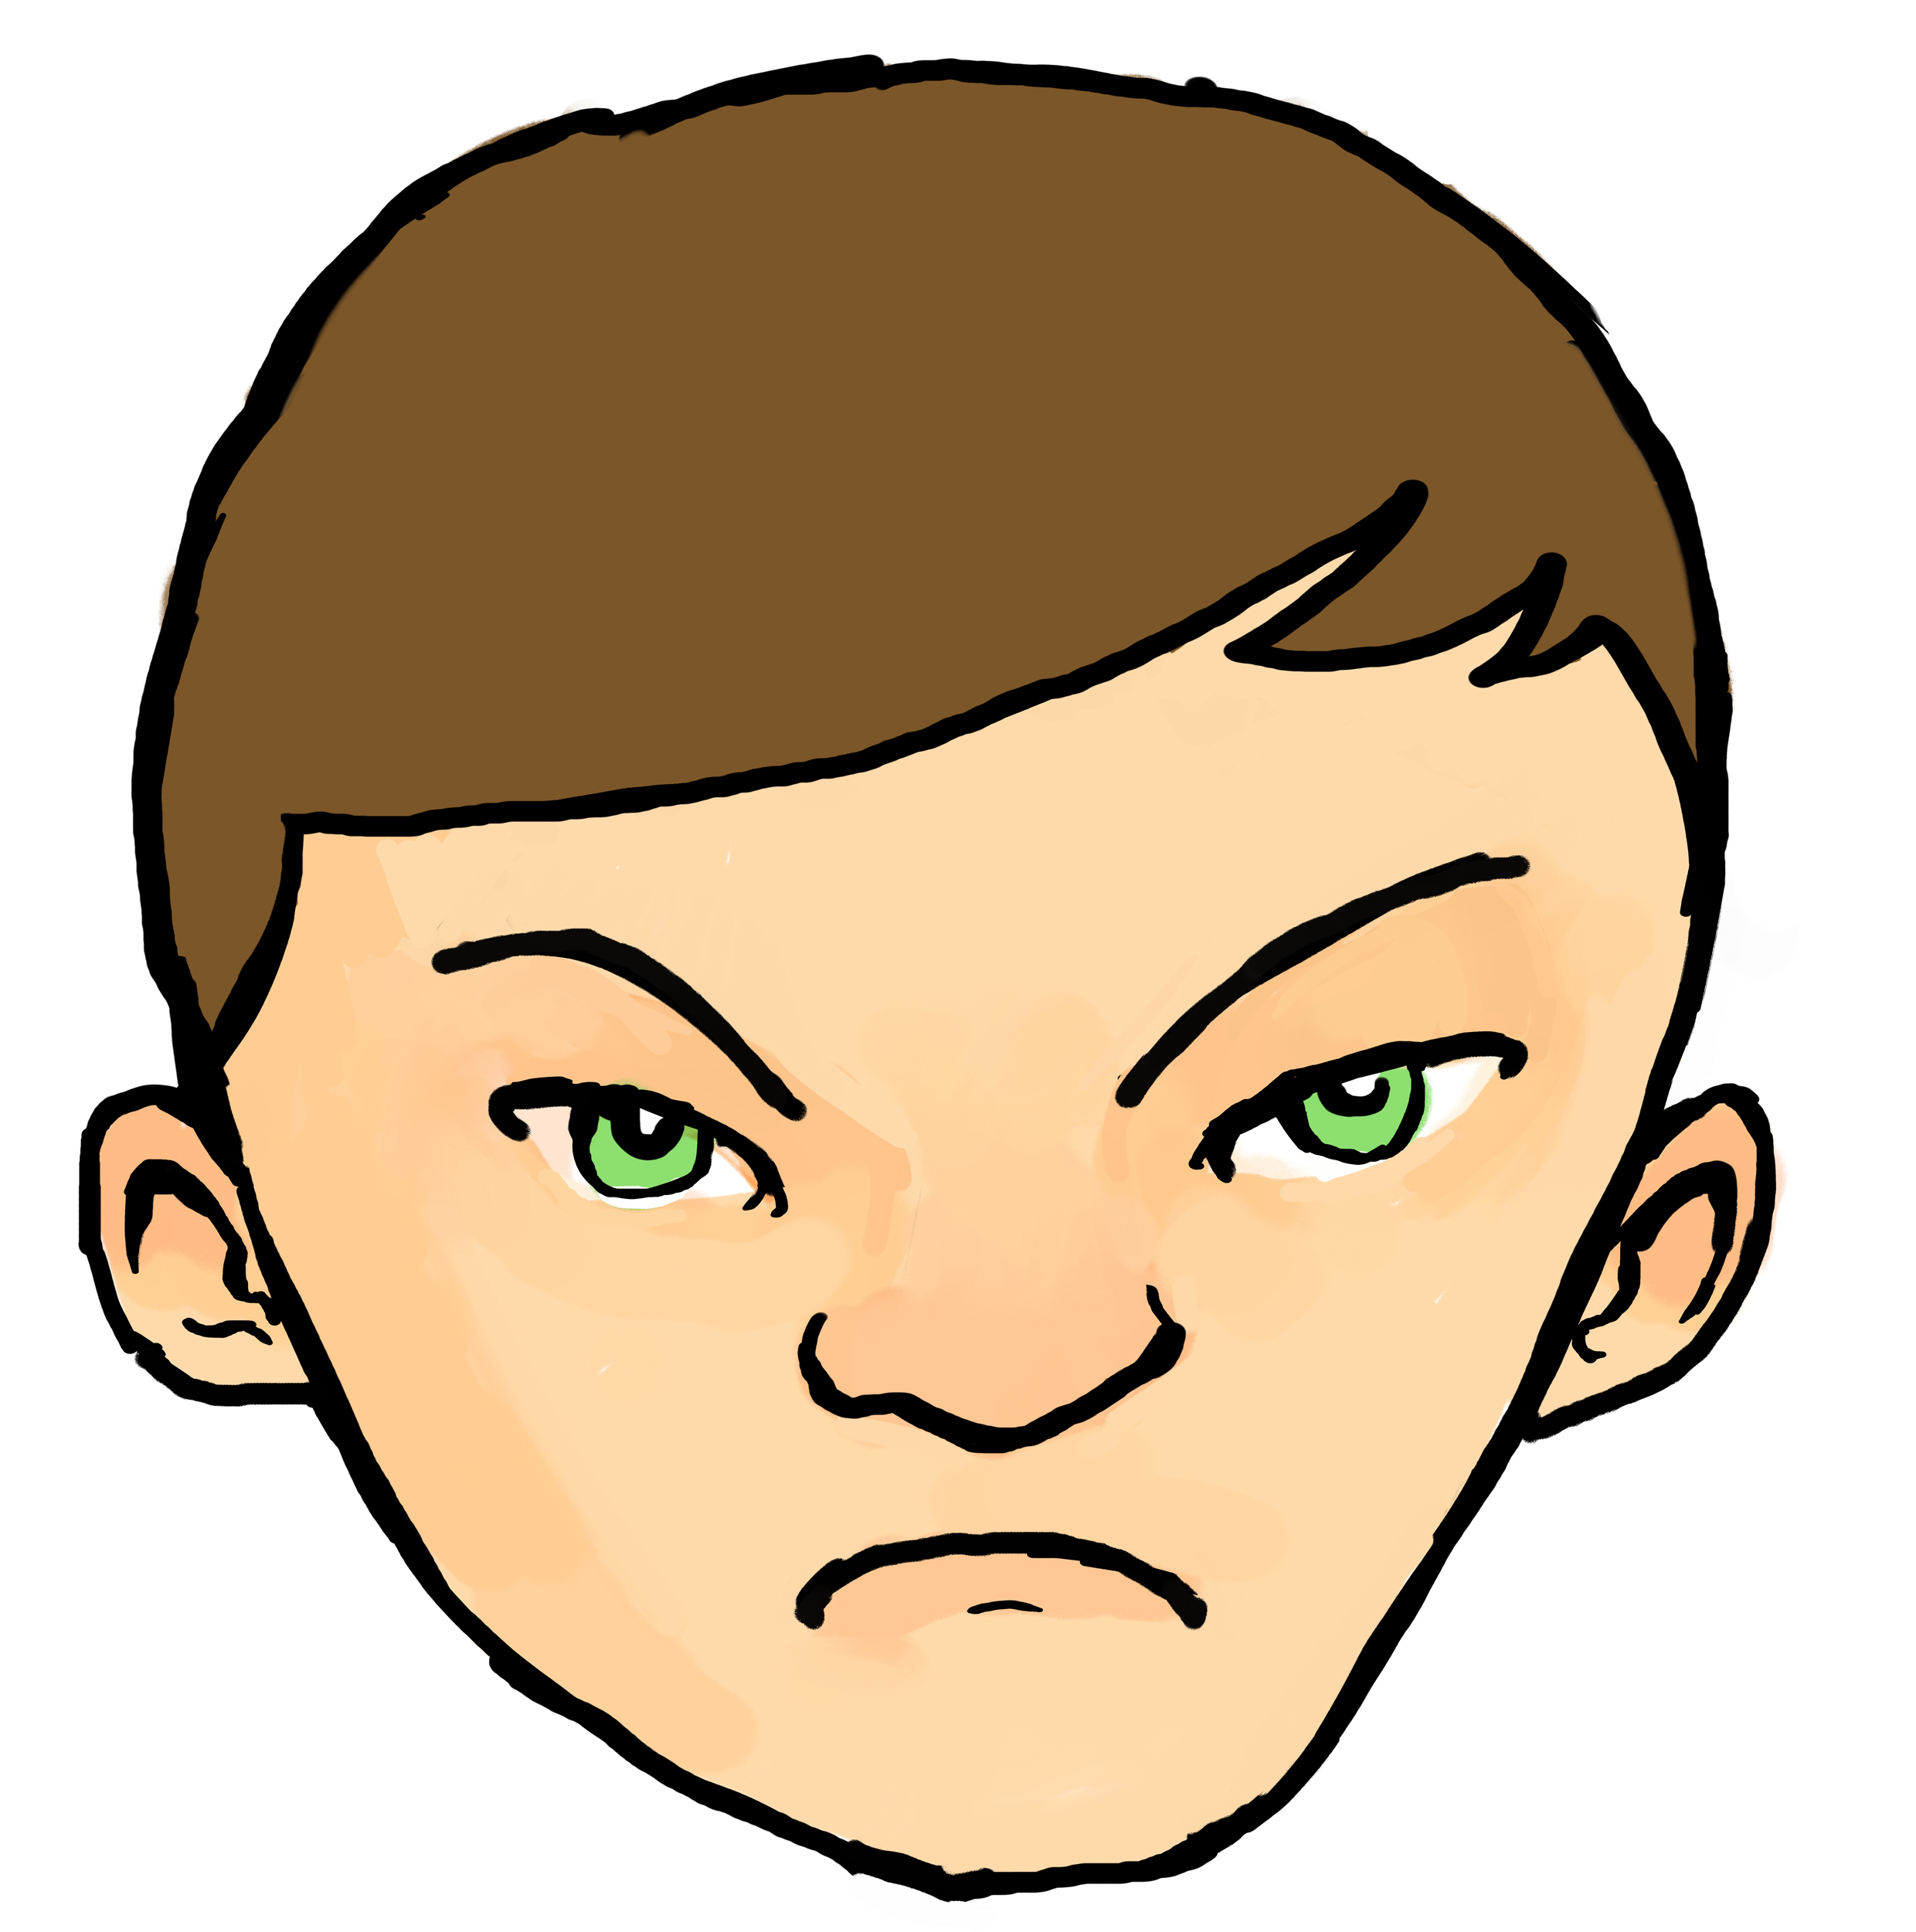 Frown Cartoon   Free Cliparts That You Can Download To You Computer